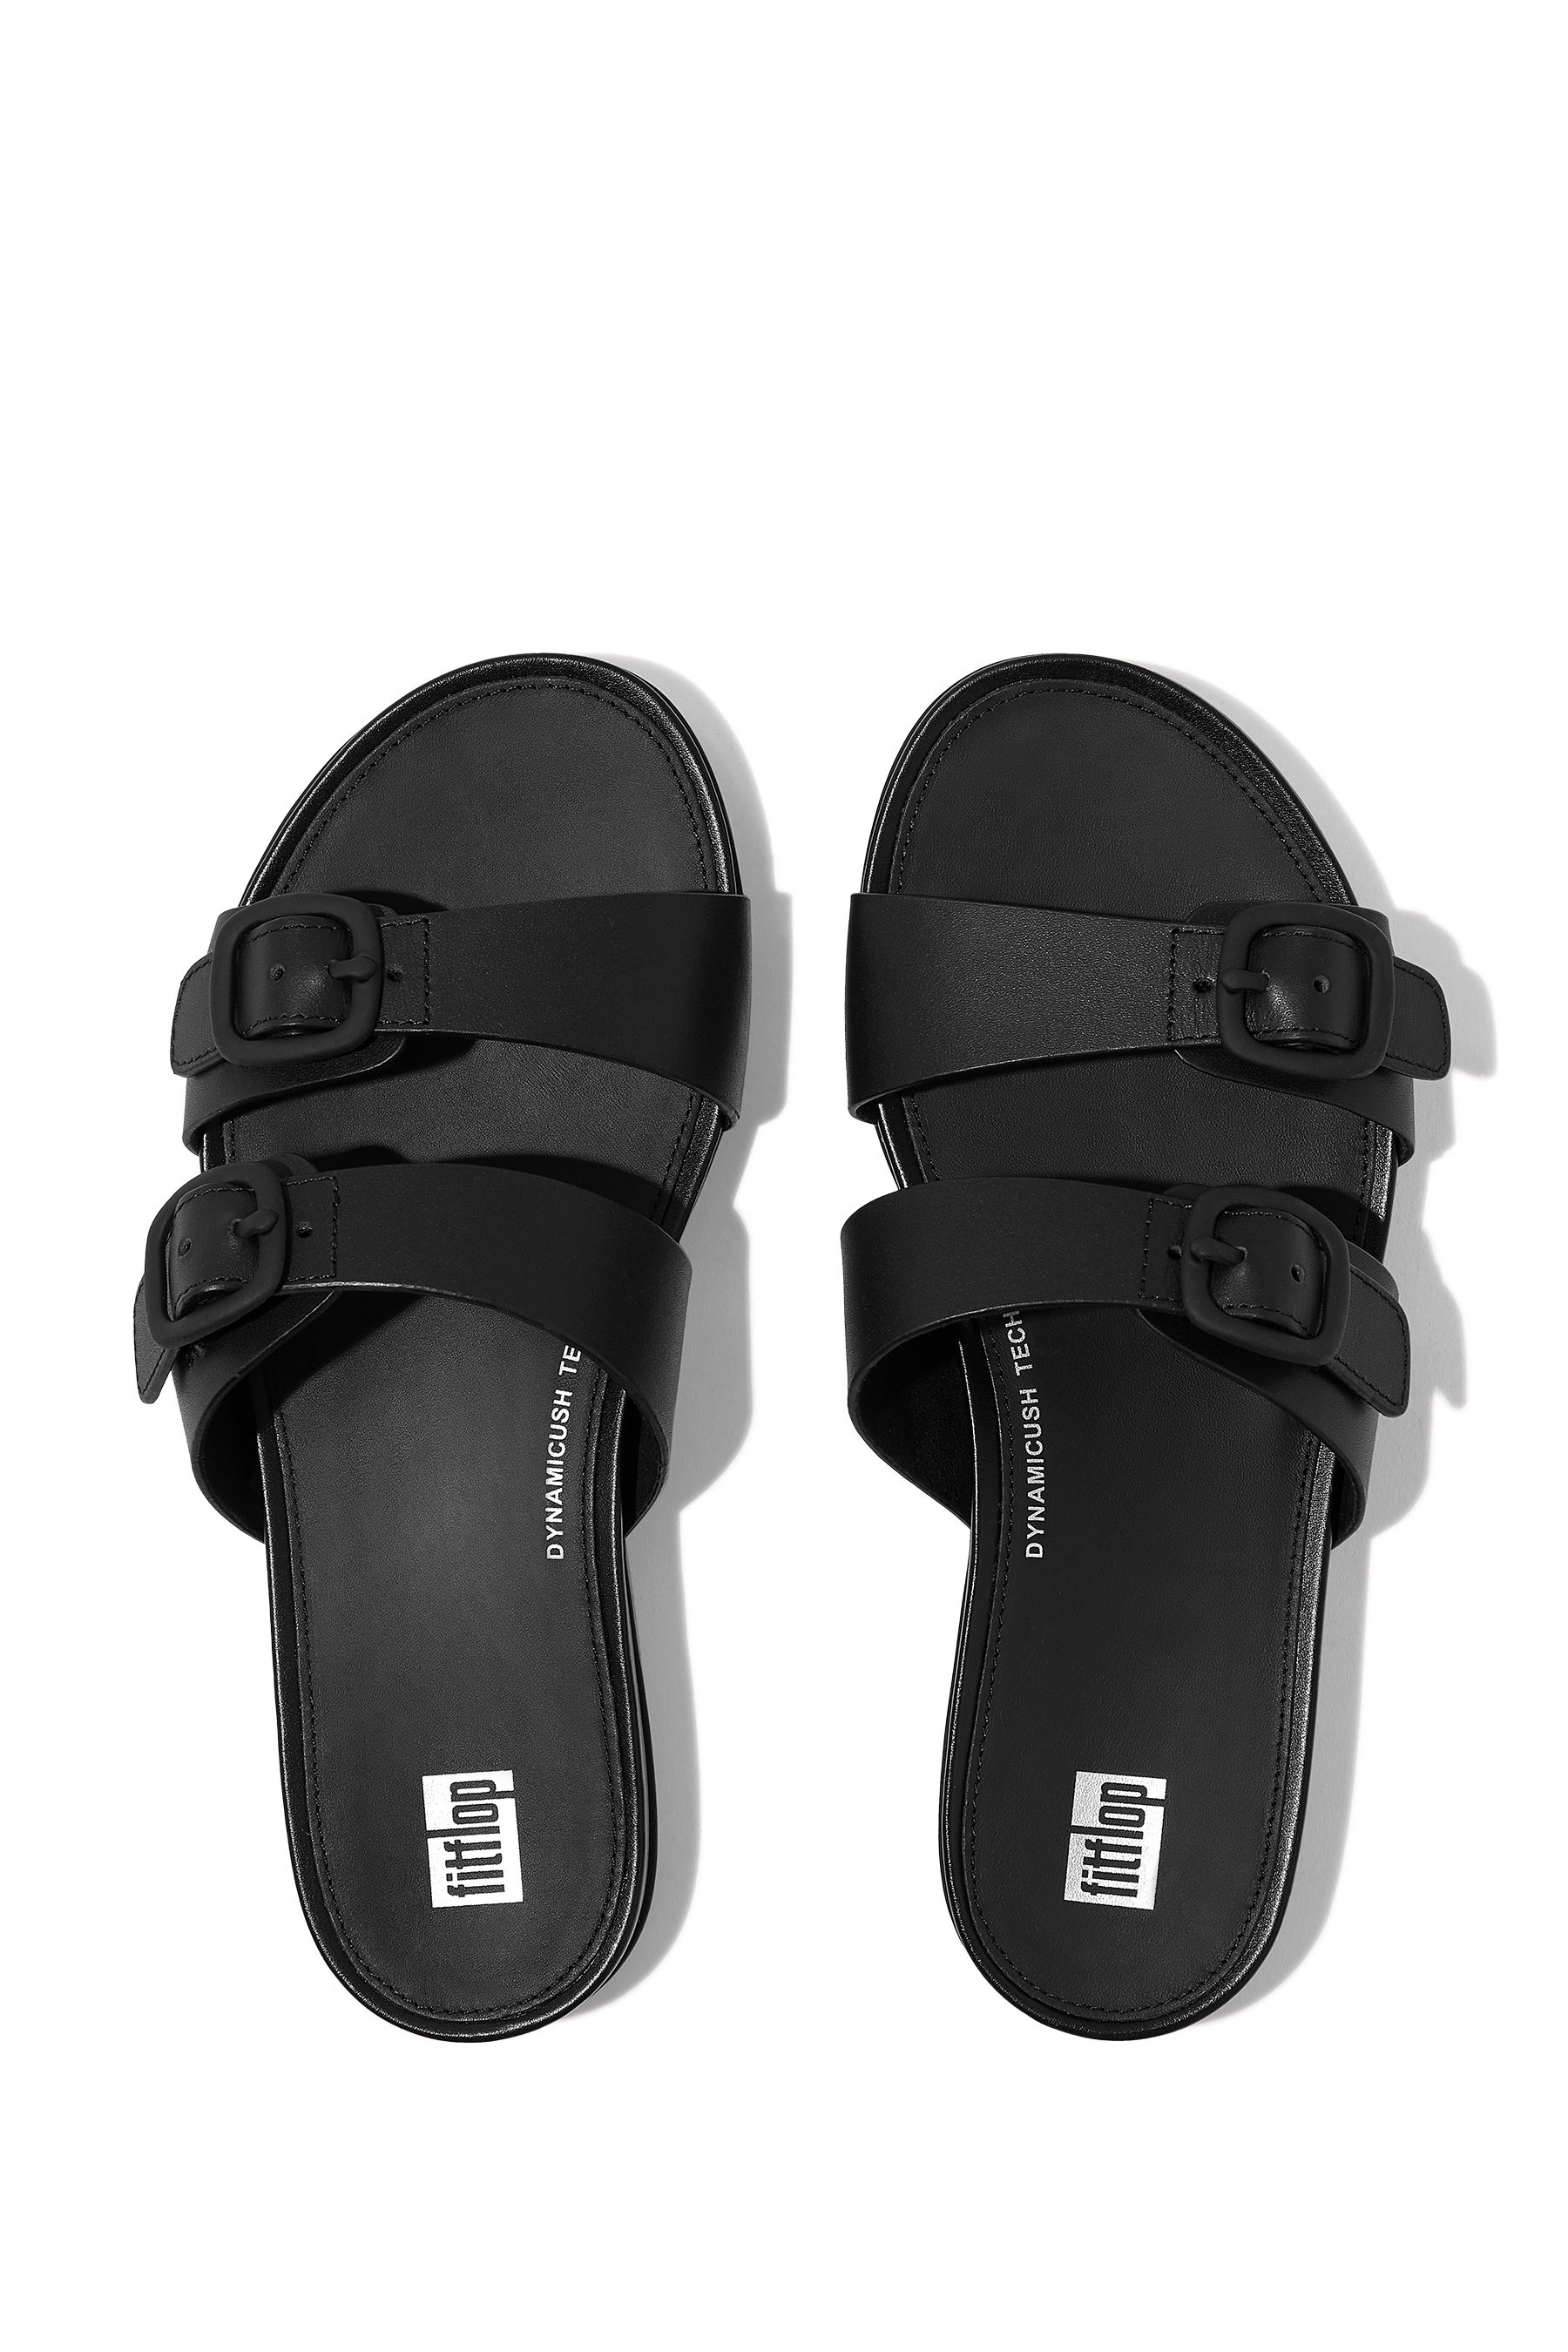 Buy FitFlop Gracie Black Rubbre-Buckle Two-Bar Leather Slides from the ...